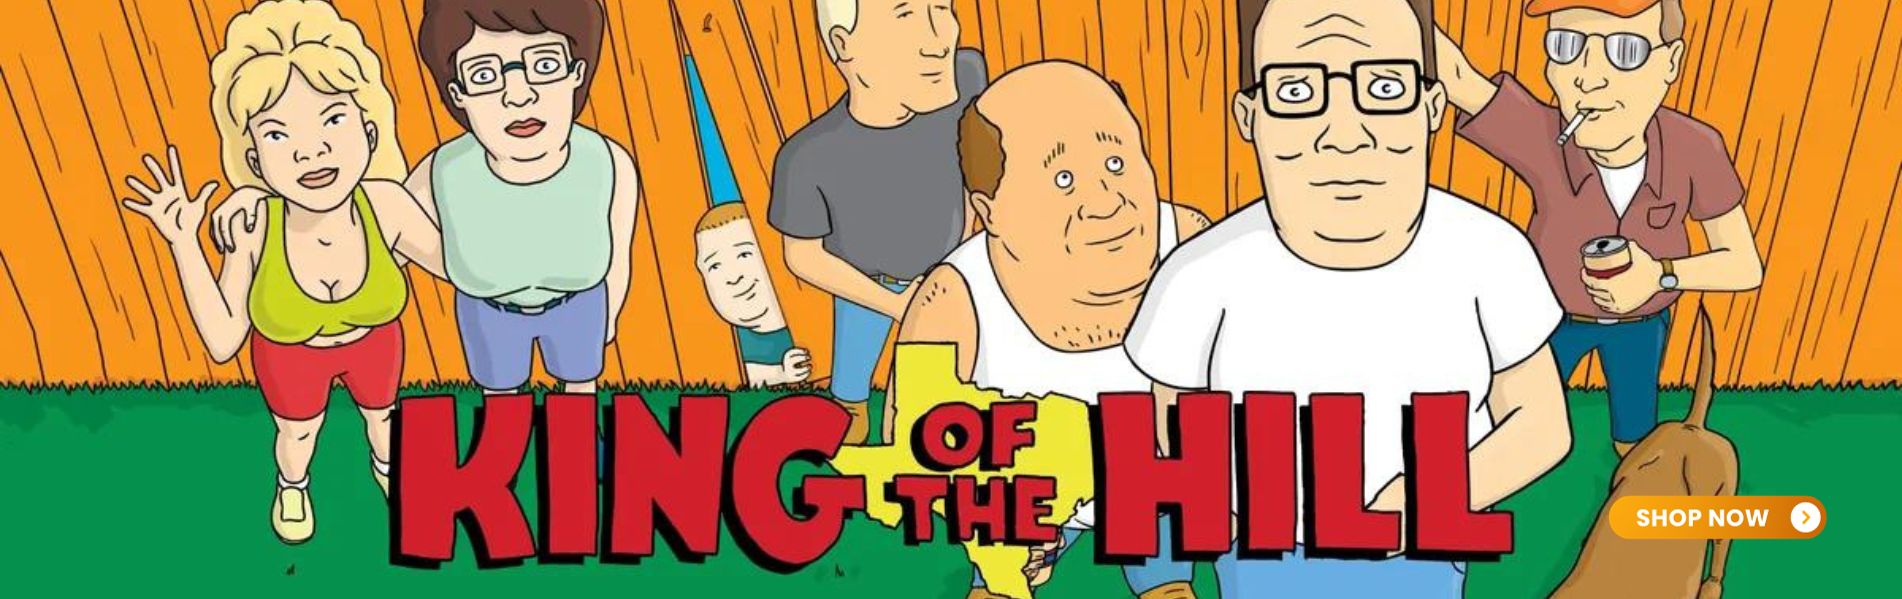 king of the hill banner 1